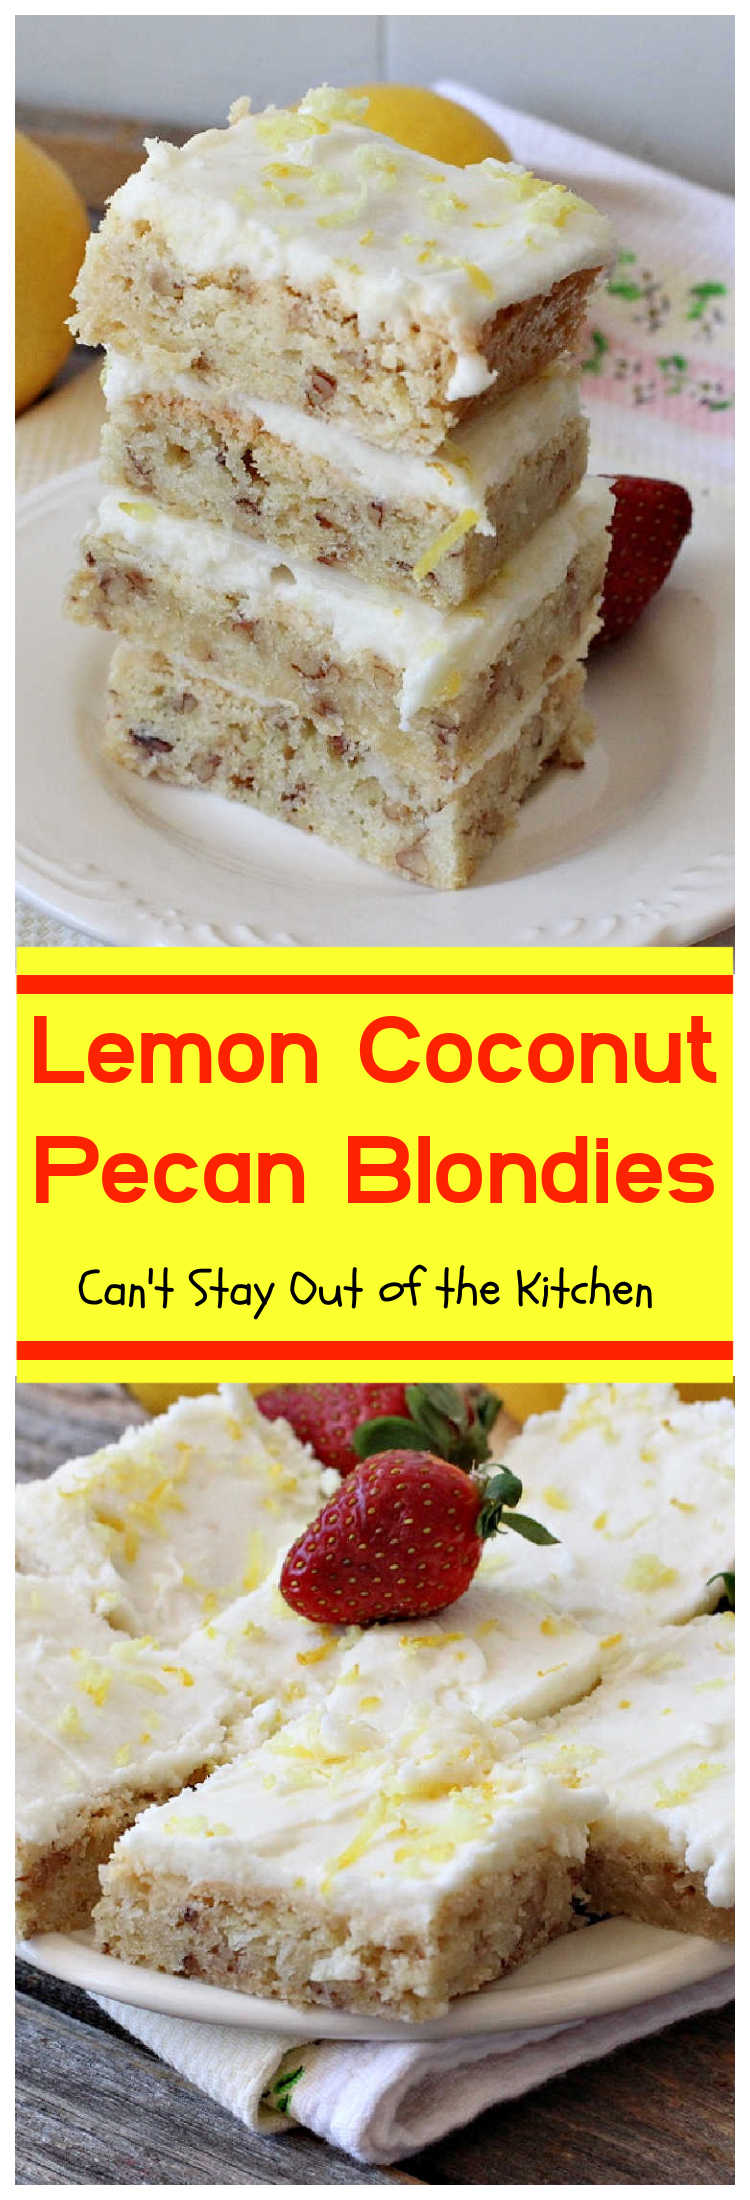 Lemon Coconut Pecan Blondies | Can't Stay Out of the Kitchen | these #cookies are divine! They have a heavenly #lemon icing and are filled with #coconut & #pecans. Great for #holiday #baking, #potlucks or #tailgating. #dessert #HolidayDessert #LemonDessert #brownie #LemonCoconutPecanBlondies